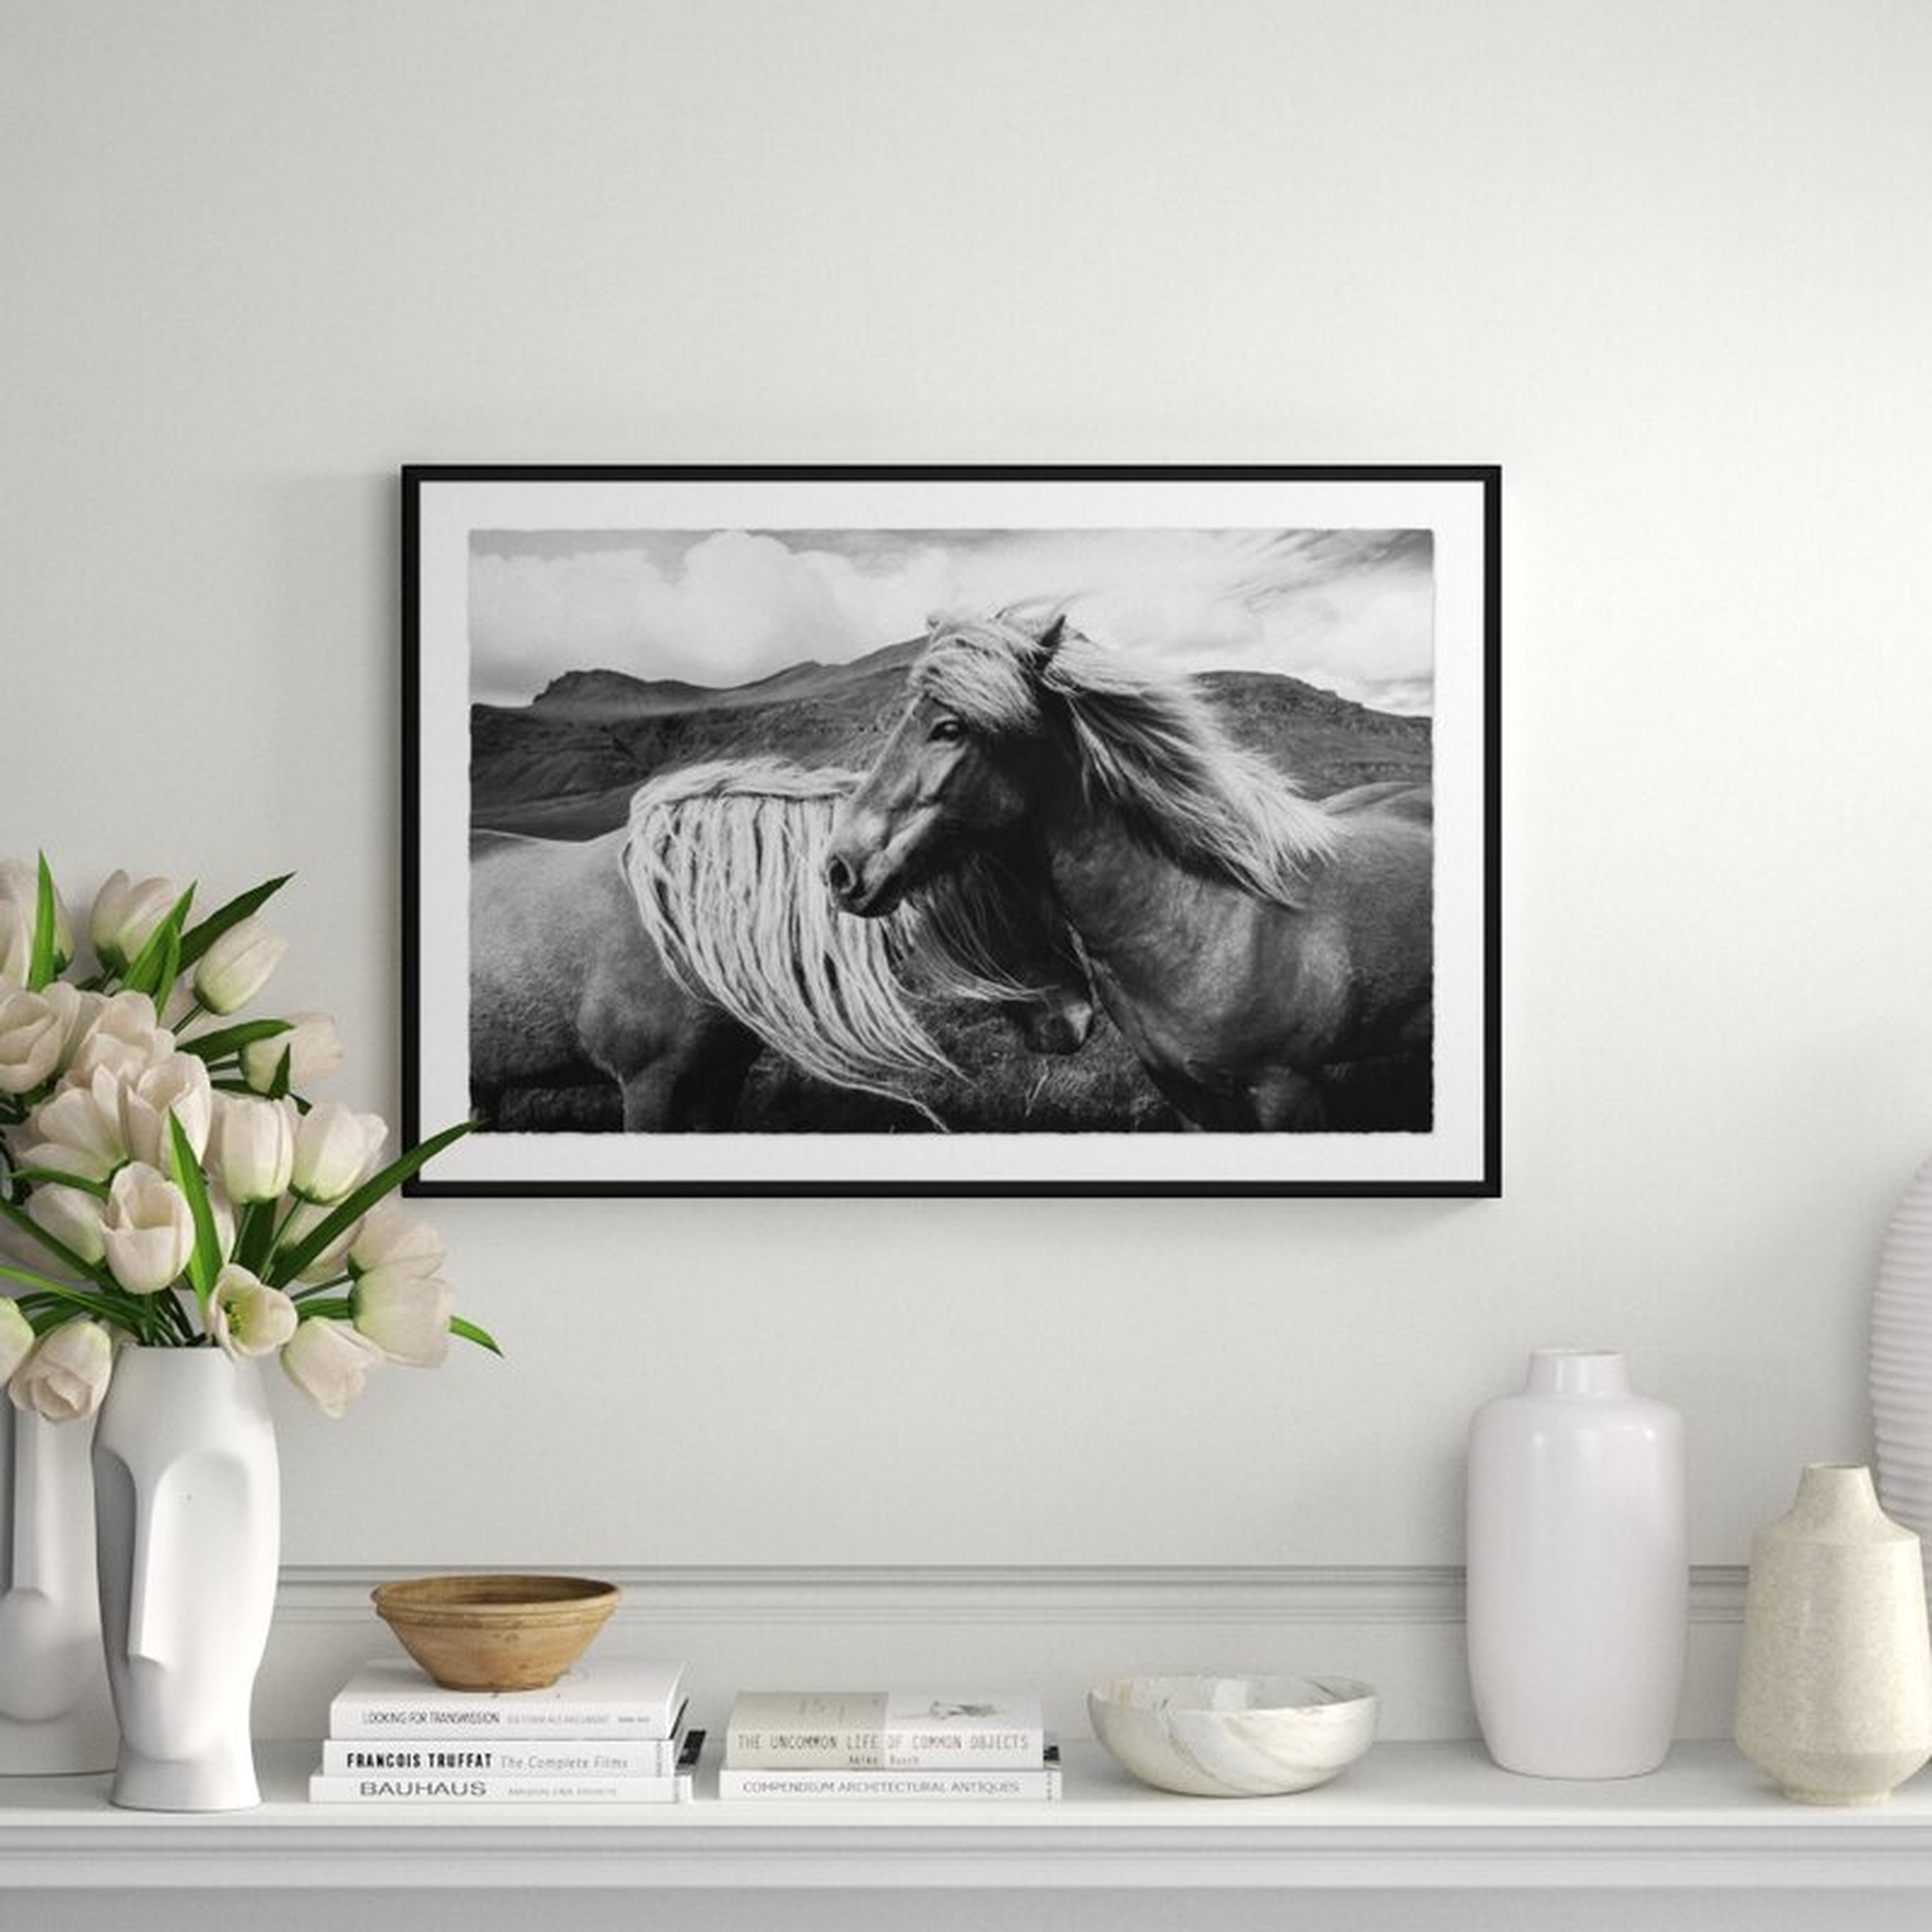 Soicher Marin Black and White Horse - Picture Frame Photographic Print on Paper - Perigold